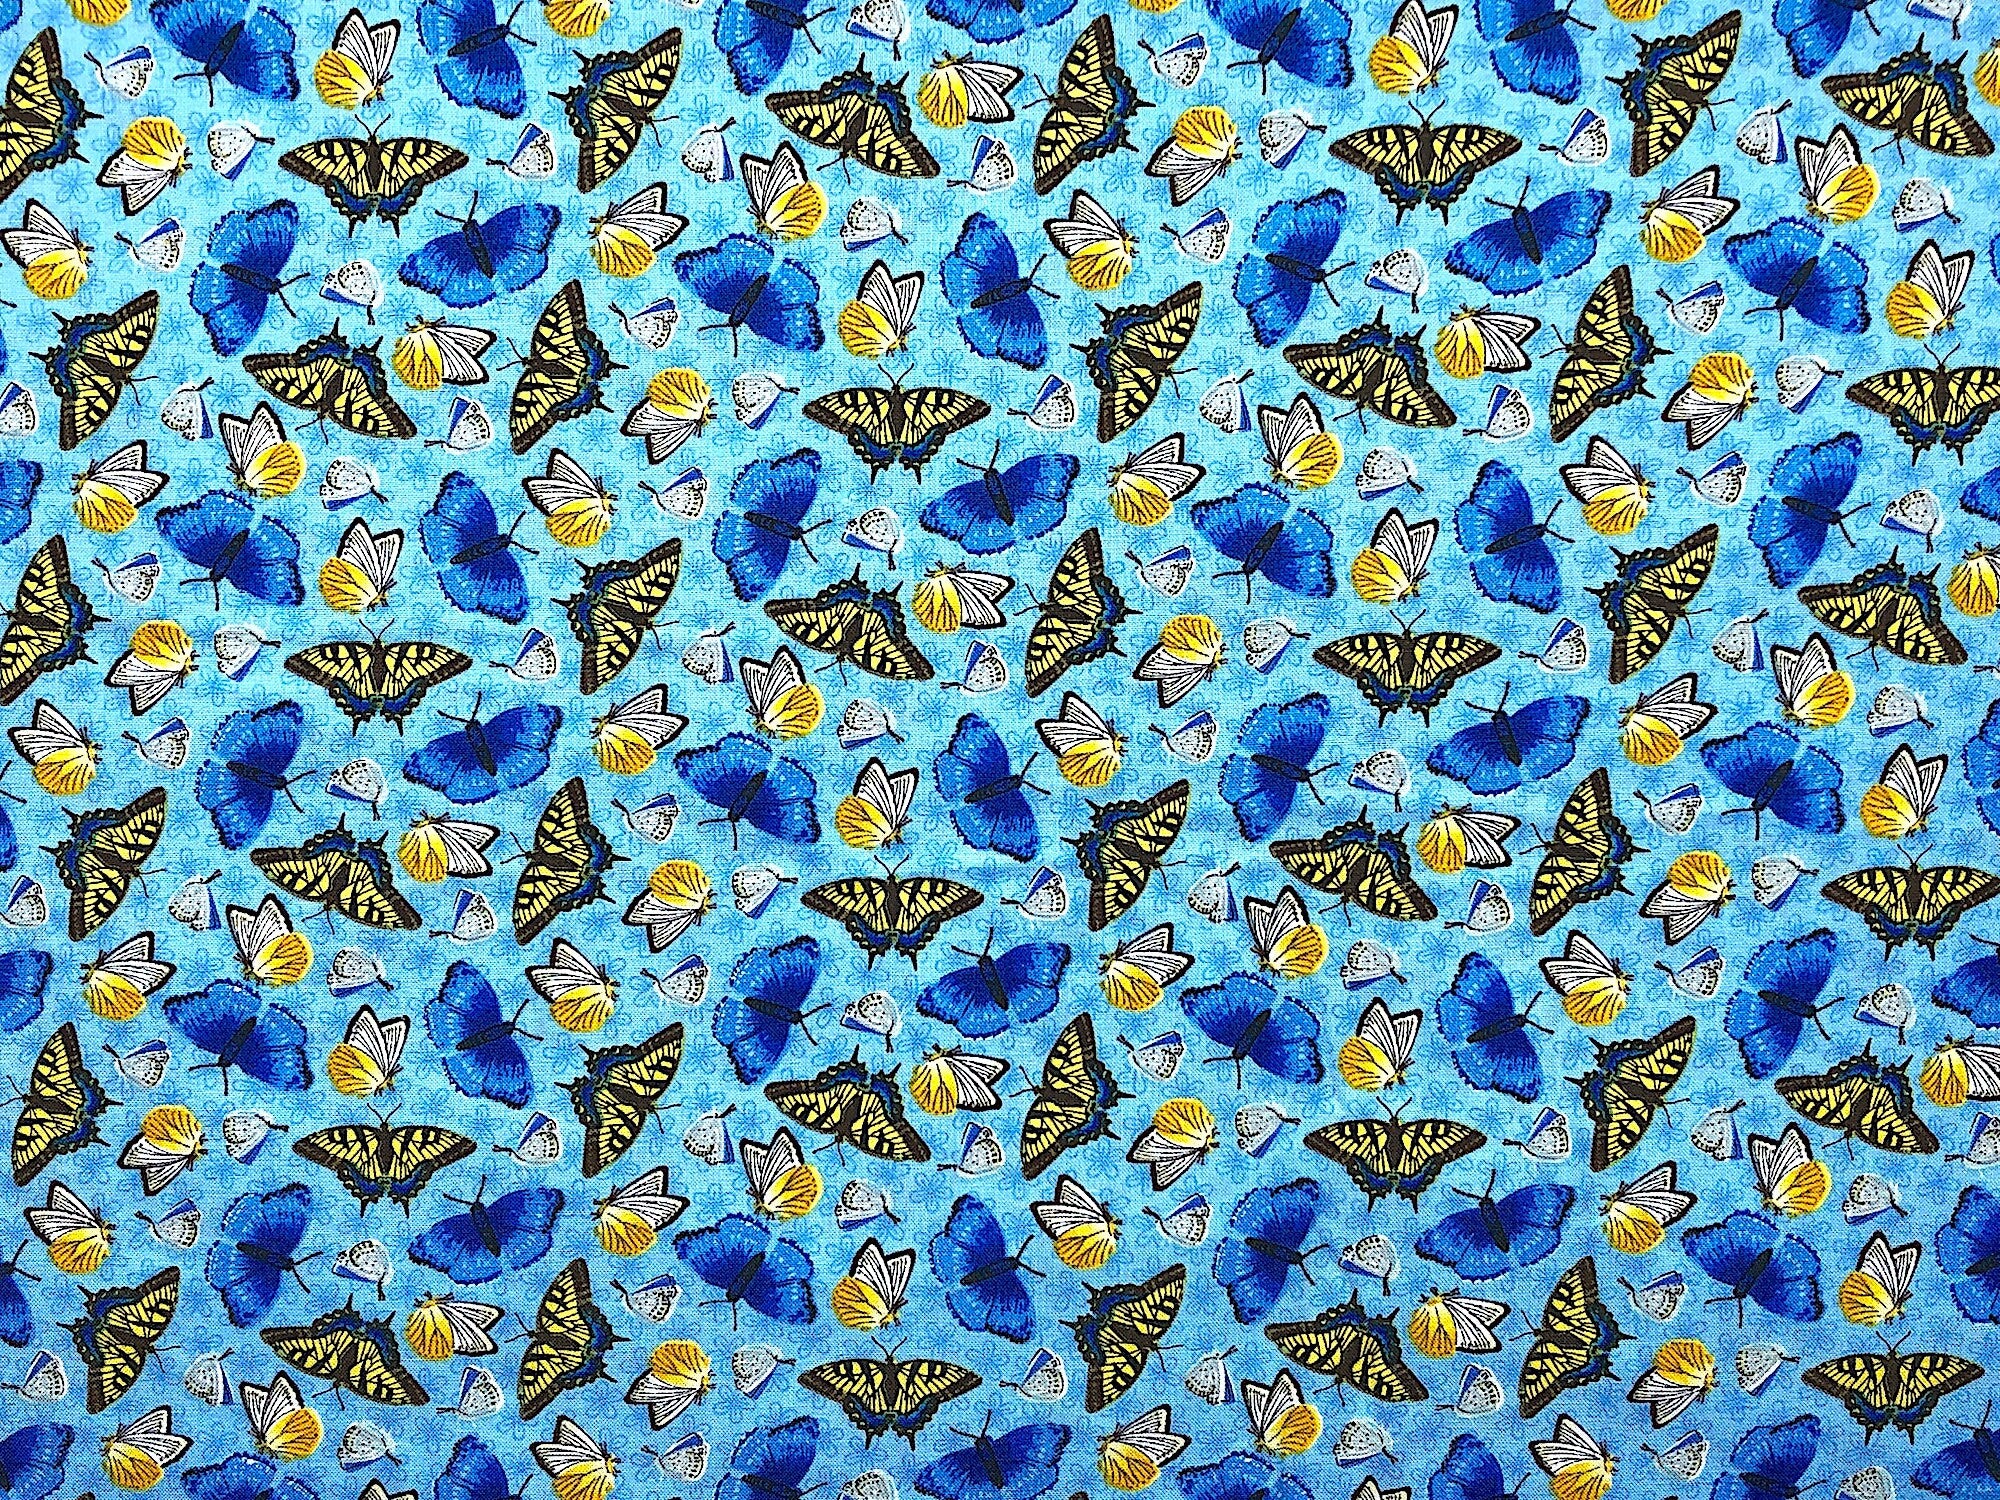 This fabric is part of the Sunny Sunflowers collection. This blue fabric is covered with blue, yellow, white and black butterflies.